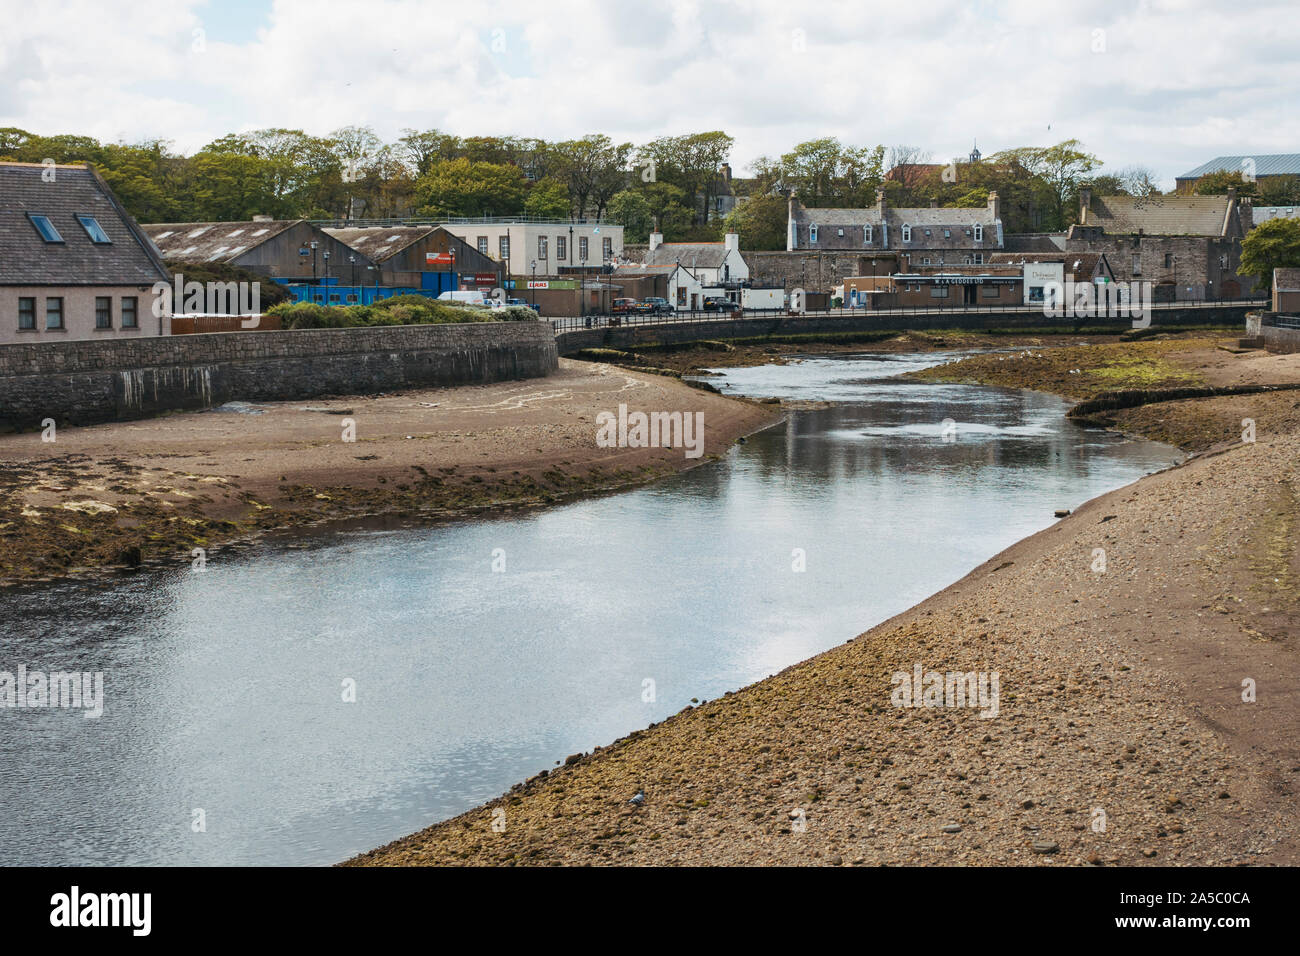 The banks of the Wick River as it runs through the town of Wick in the north of the United Kingdom Stock Photo